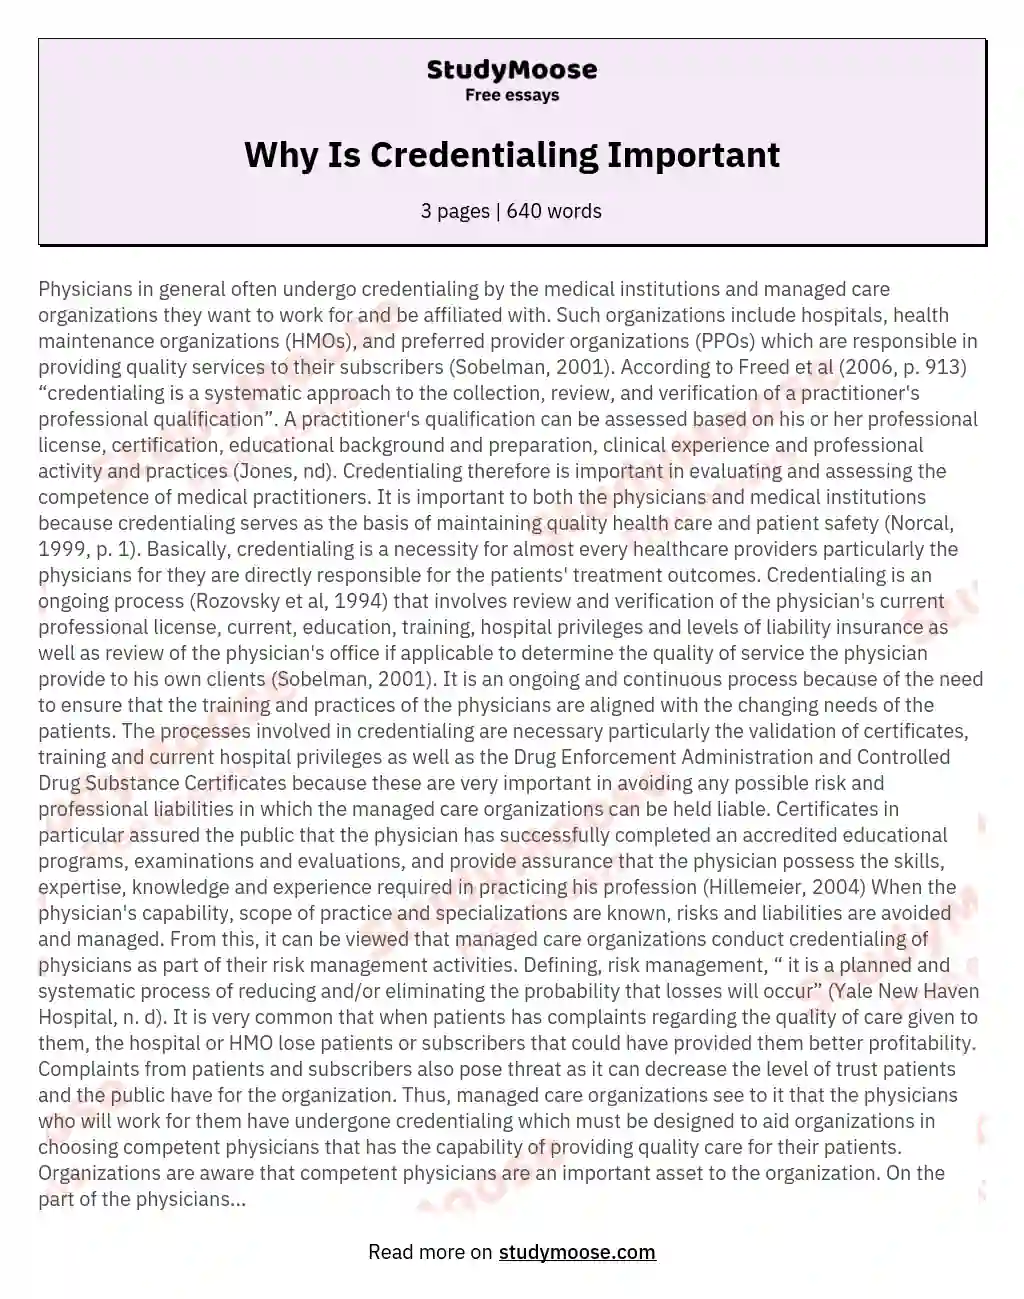 Why Is Credentialing Important essay